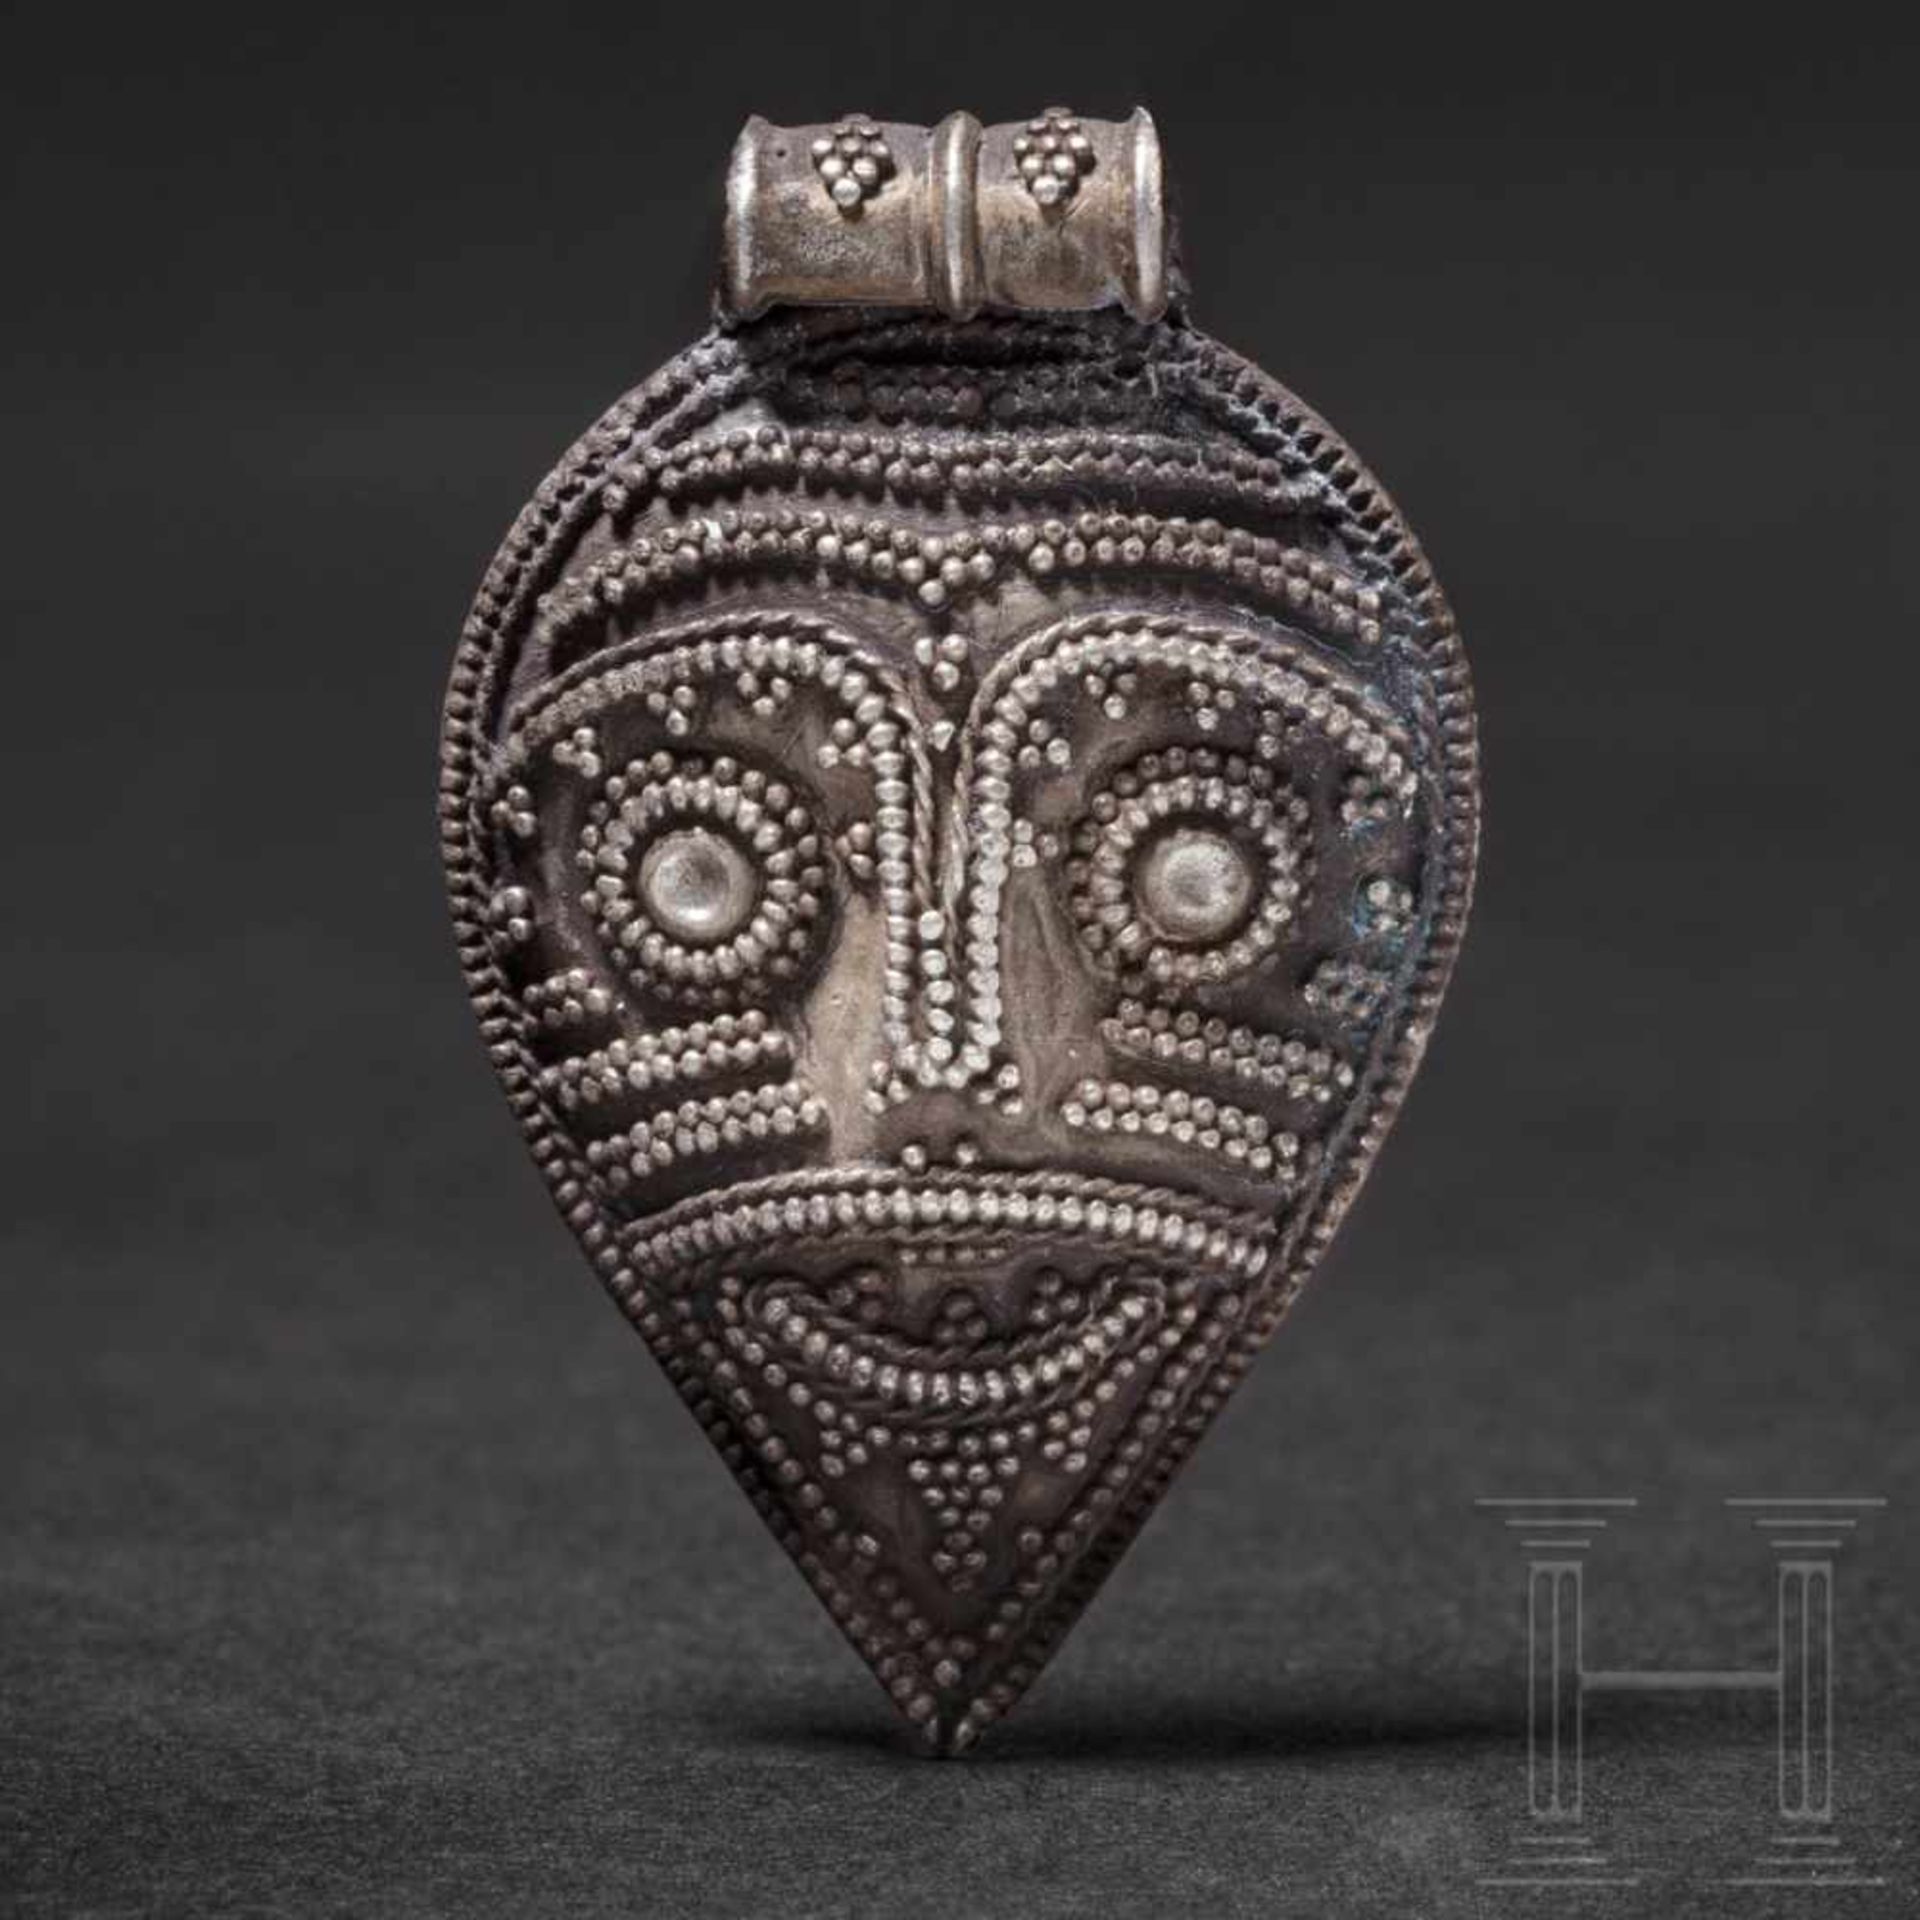 A Viking silver pendant with warrior head, 10th – 11th centuryA silver pendant representing the face